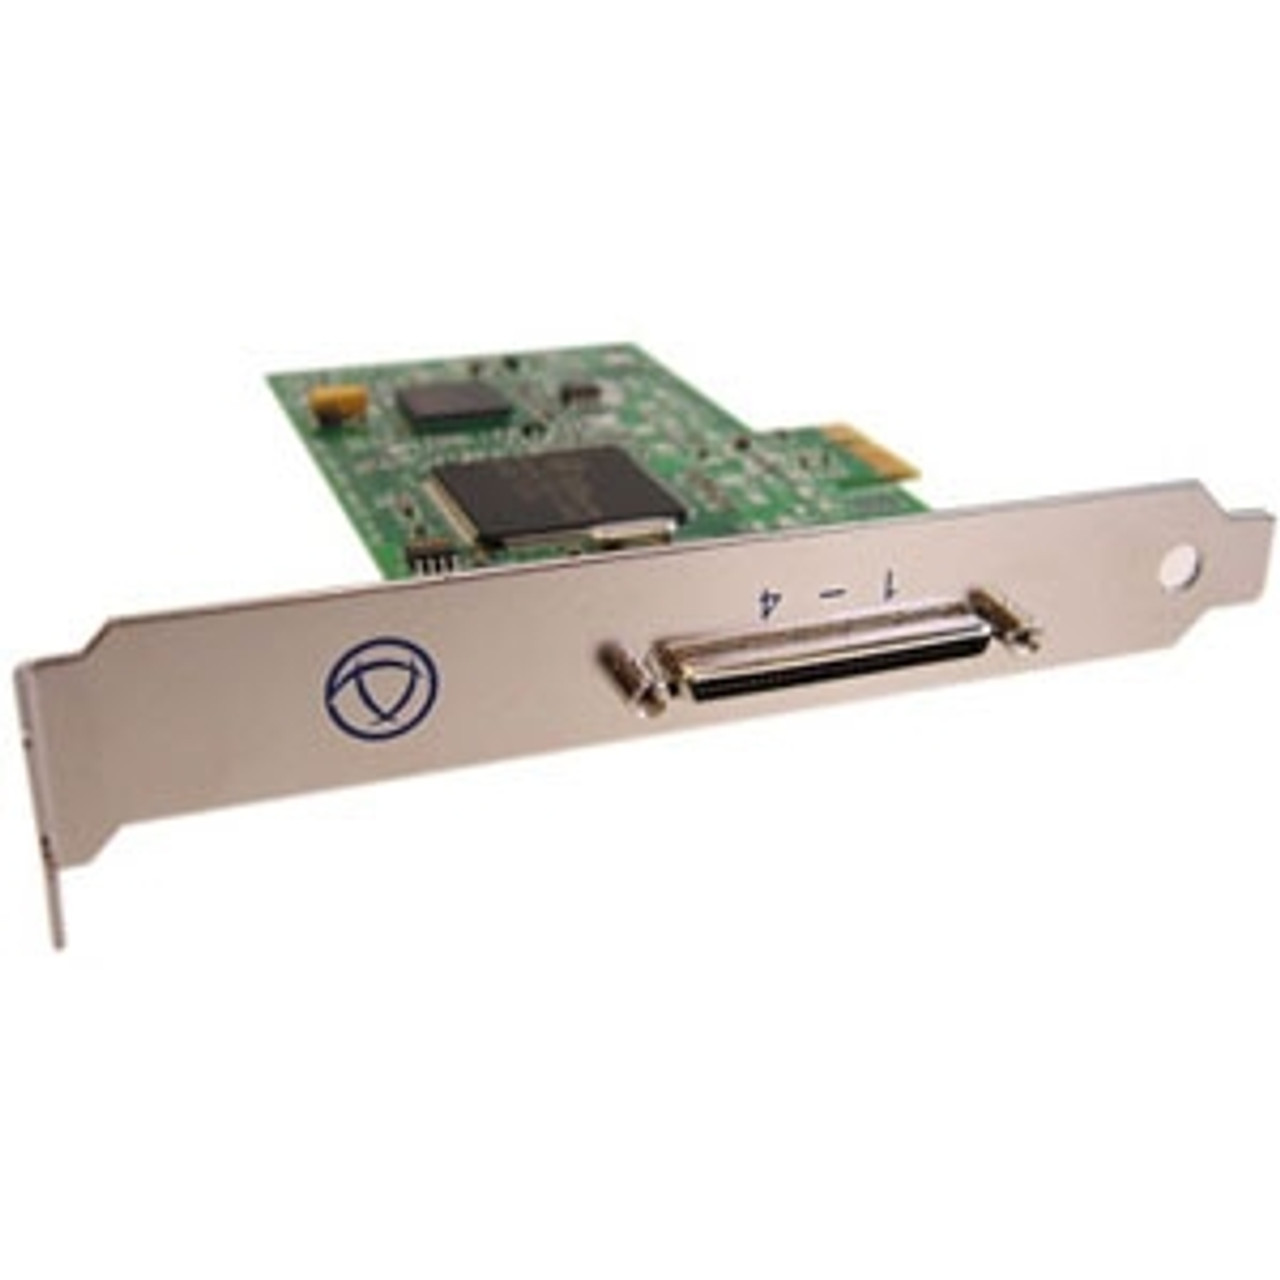 04002080 Perle Systems Perle UltraPort4 Express HD Multiport Serial Card 4 x RS-232 Serial Via Cable Half-length Plug-in Card